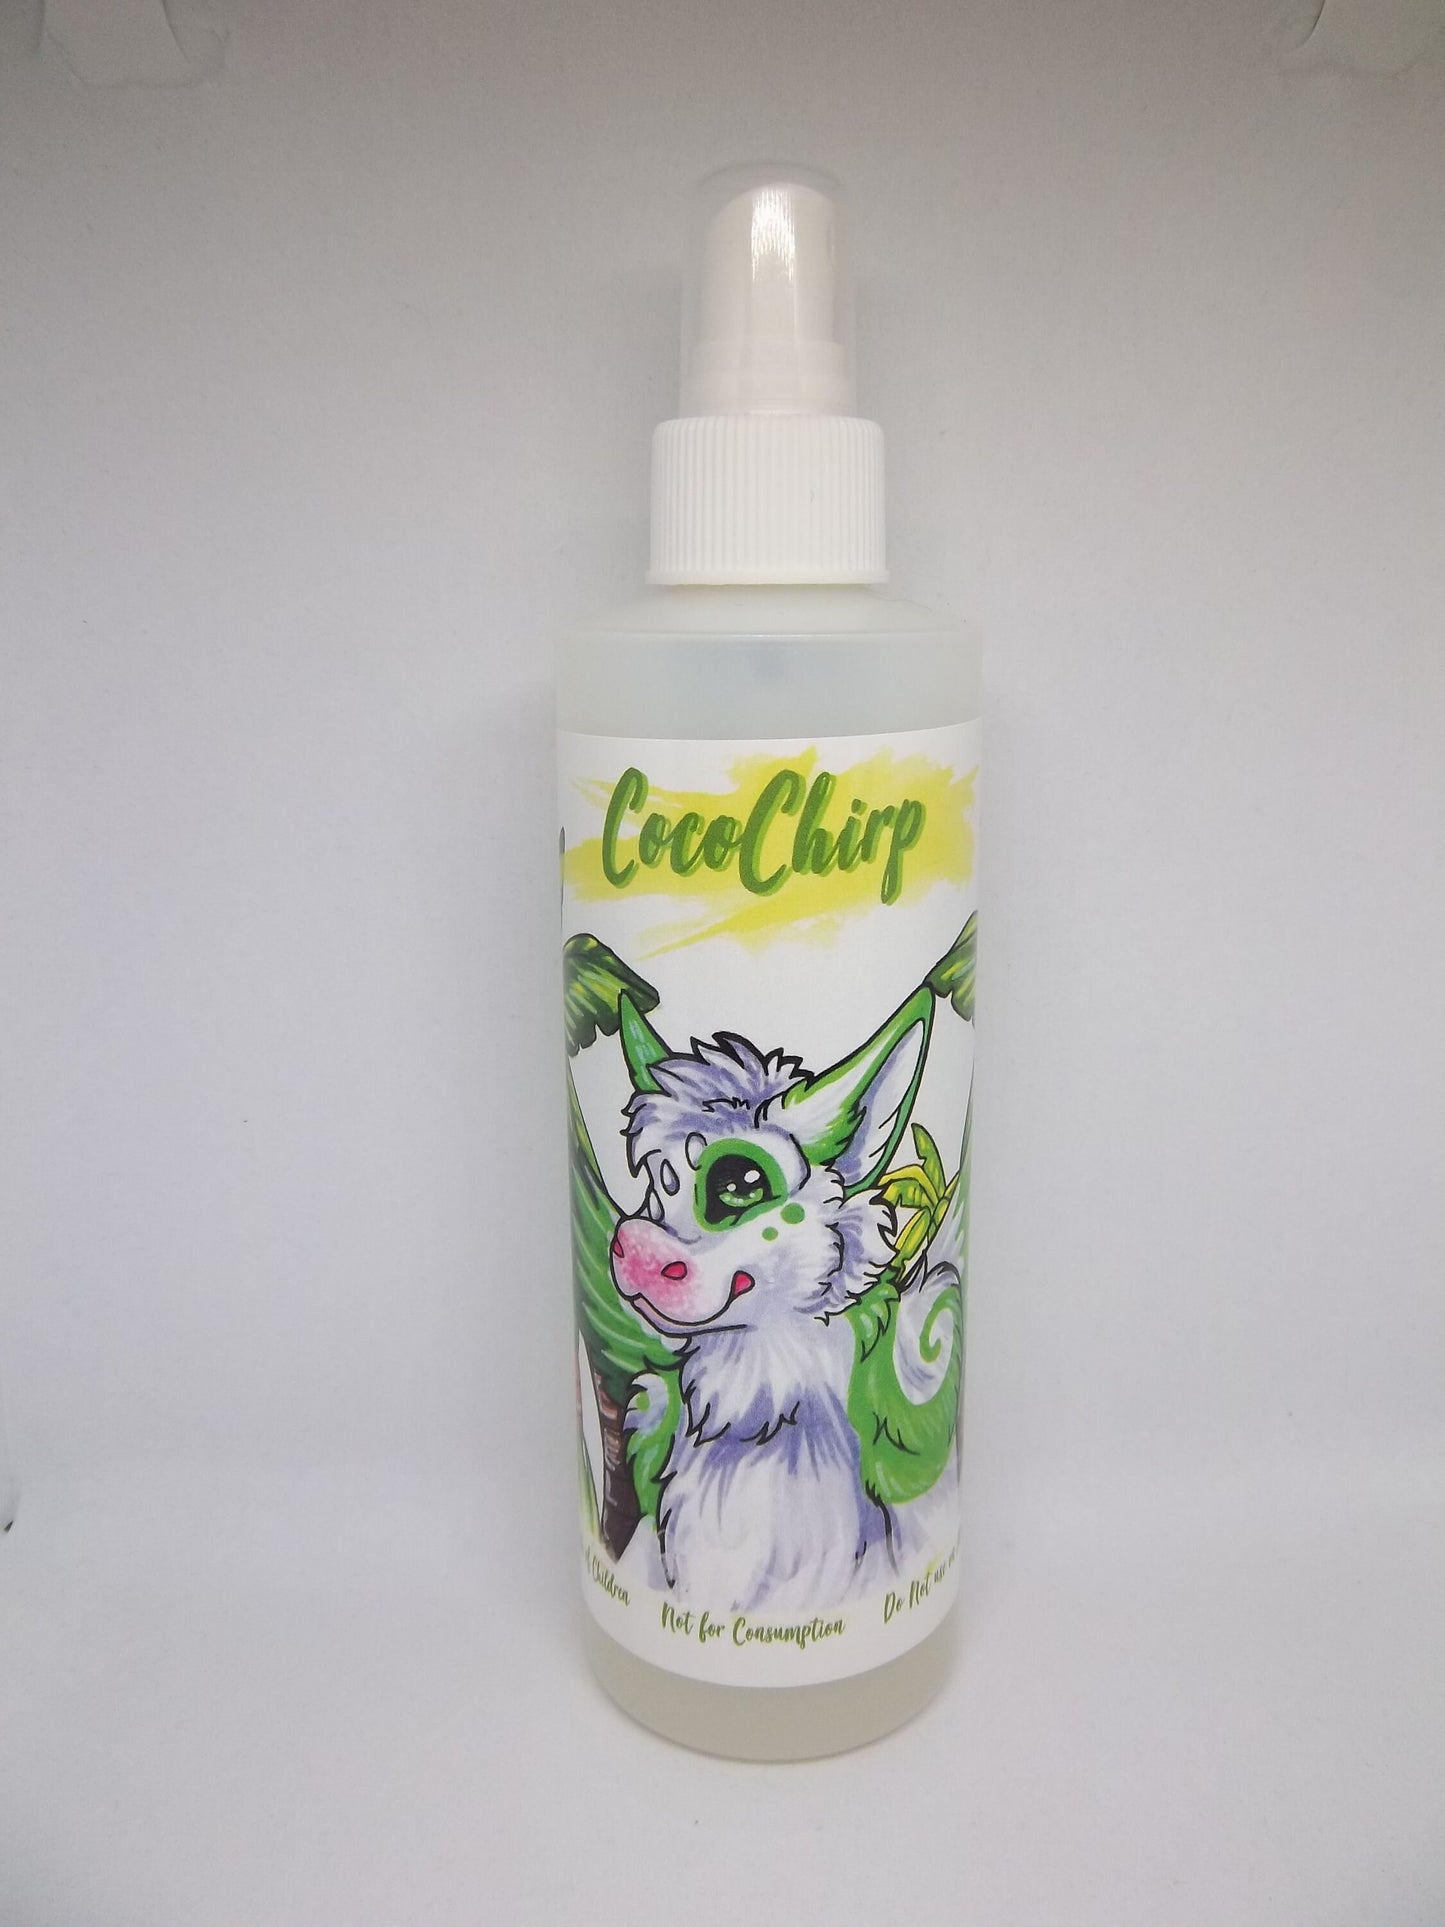 Coconut Fursuit Spray 8oz - CocoChirp Fragrance and Essential Costume Cleaner